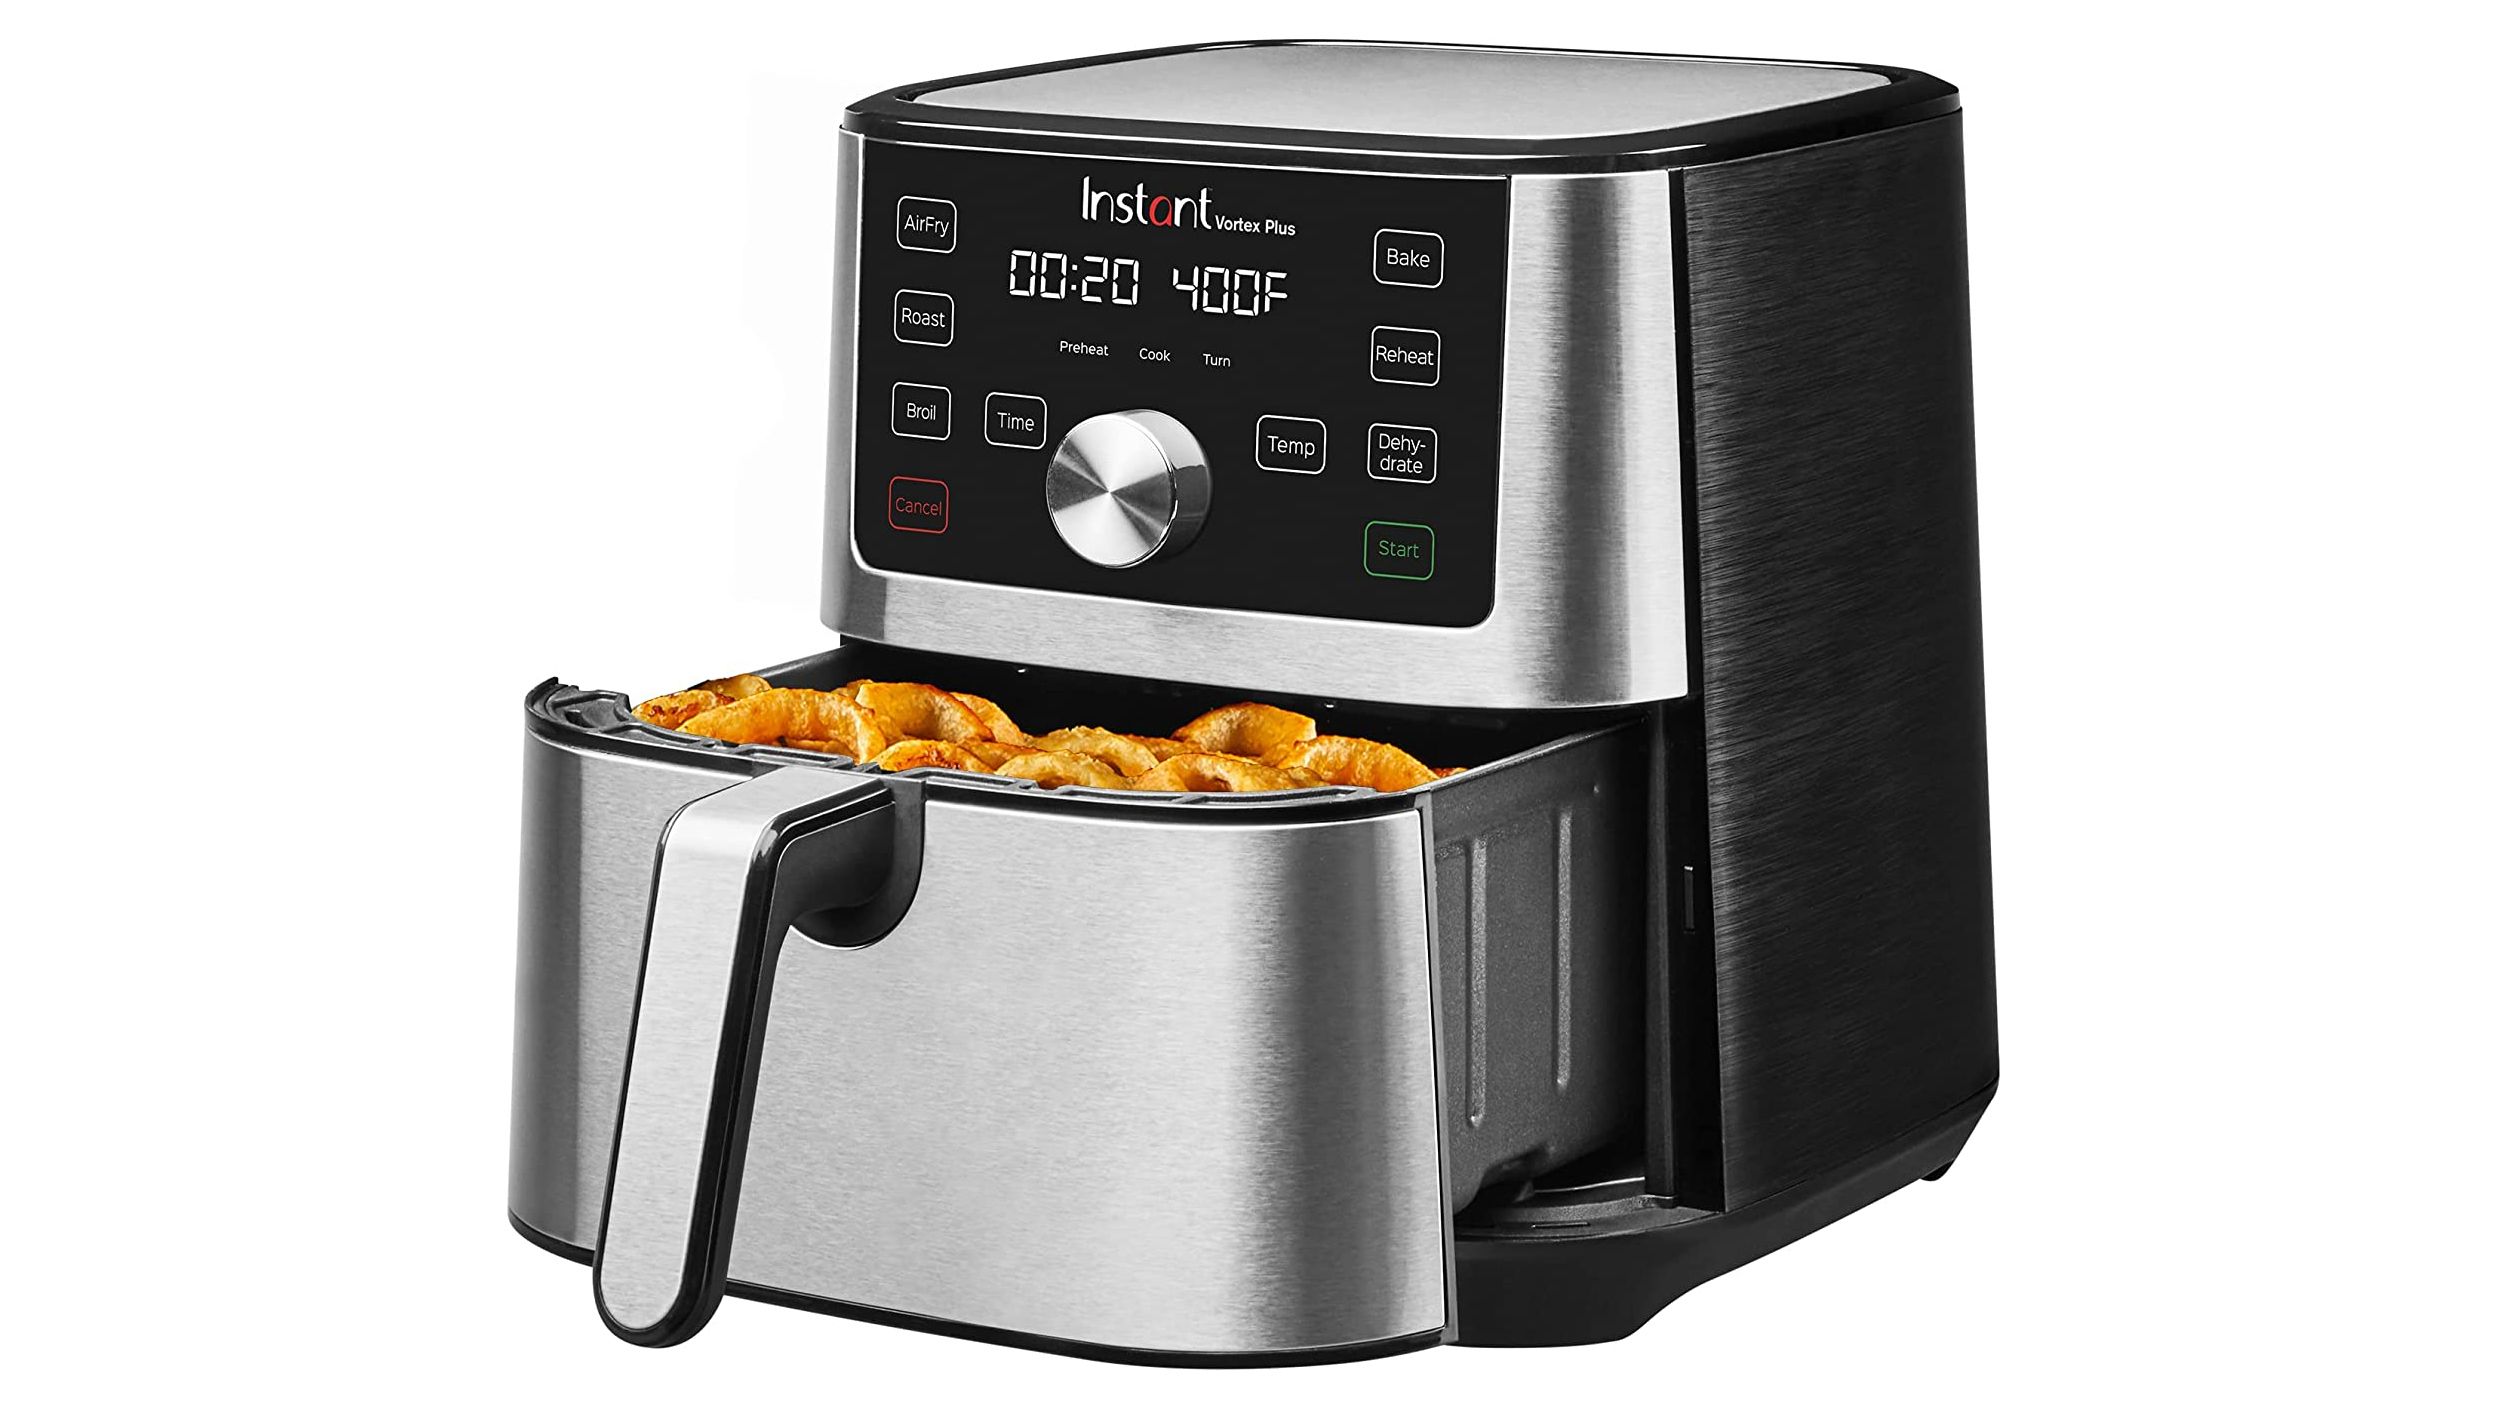 Quick! This Ninja Air Fryer just crashed to $99 in 's Prime